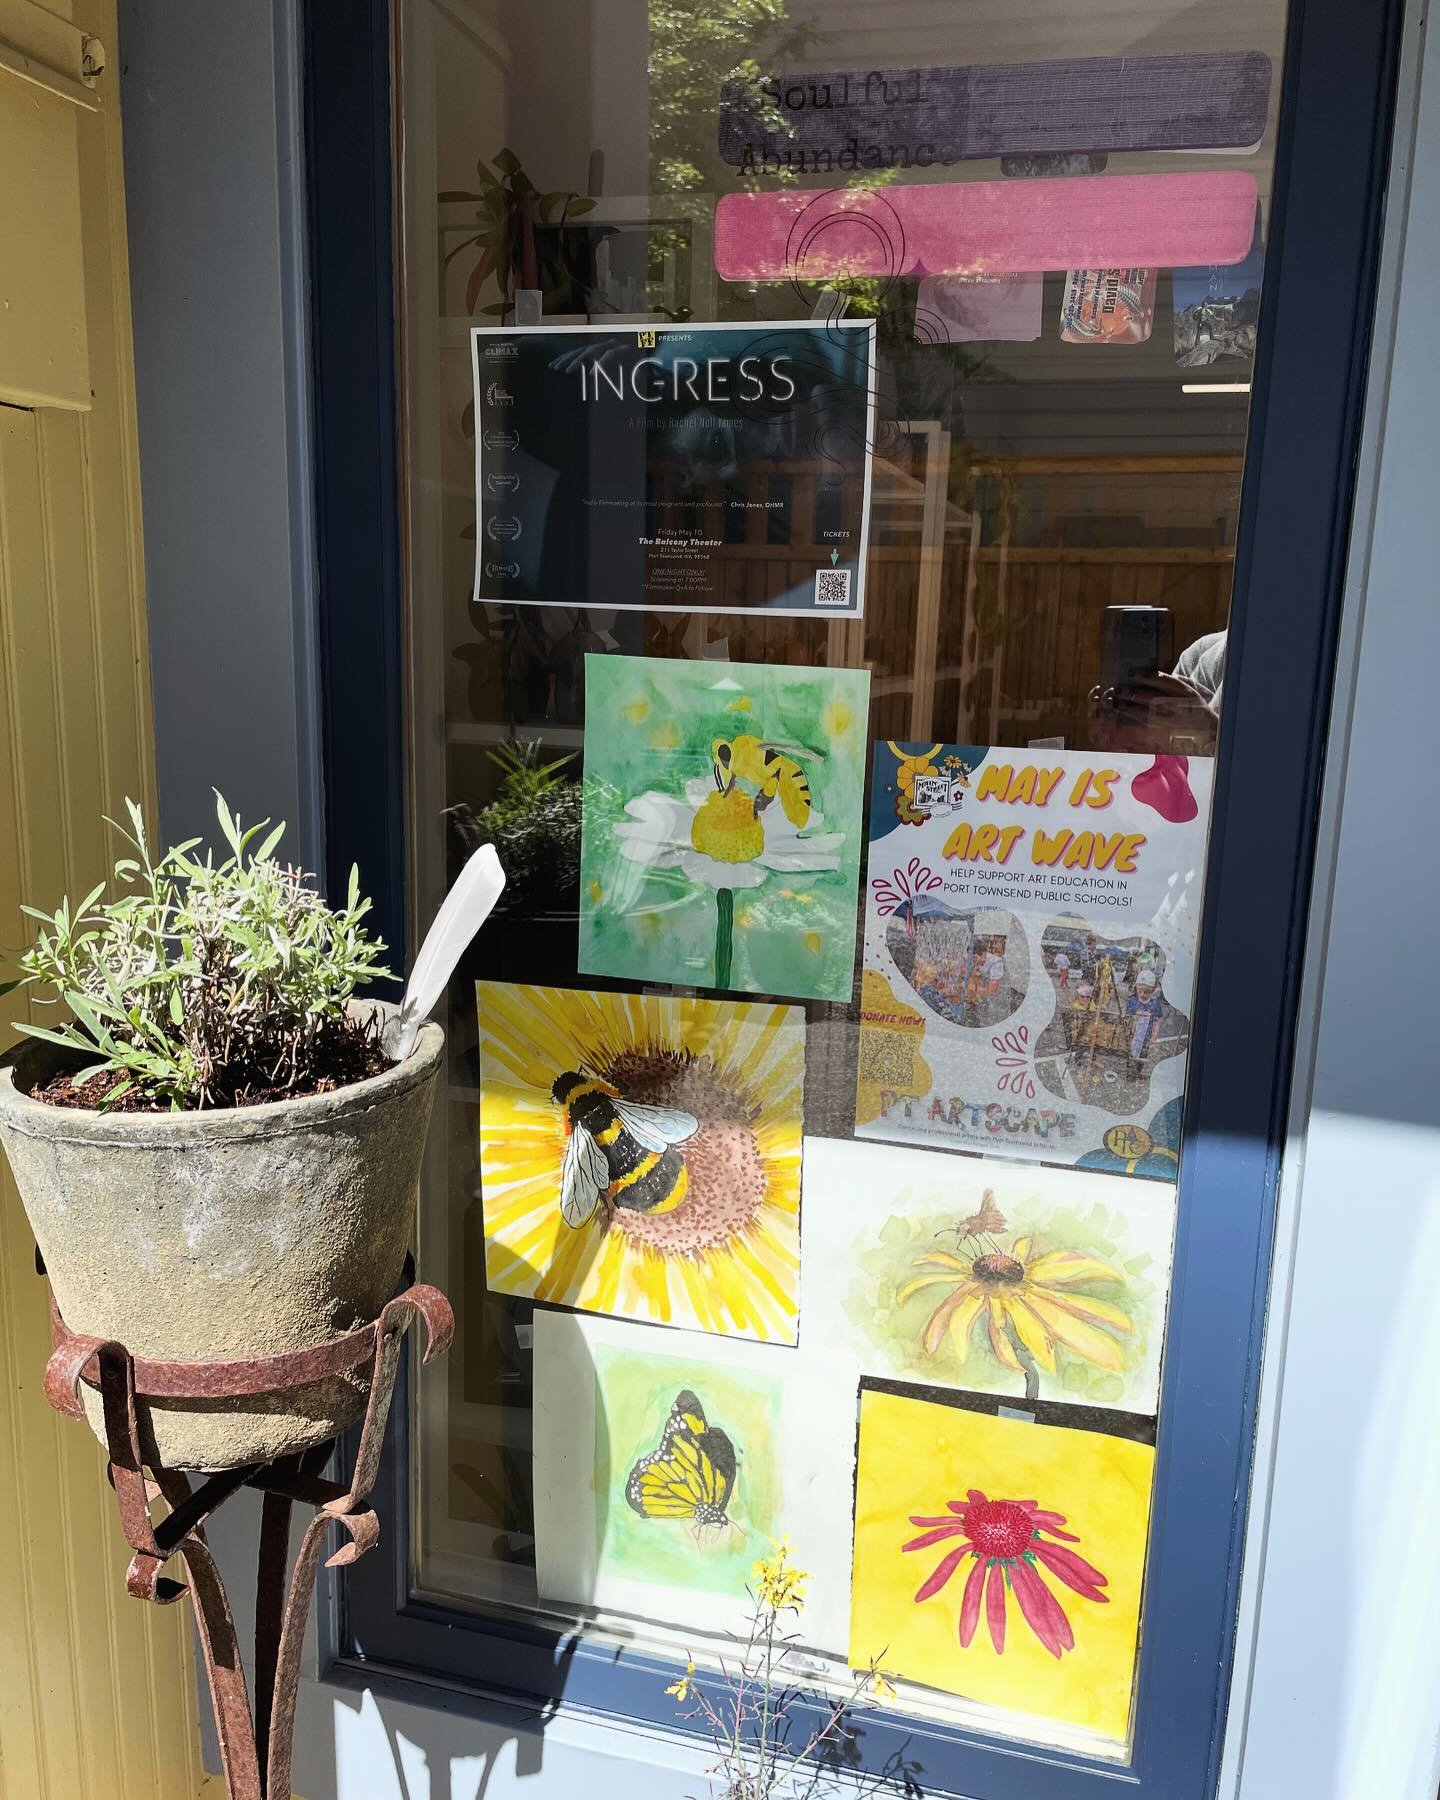 It&rsquo;s Art Wave month in Port Townsend! Celebrating student art with cute bees and flowers. 🌸 🐝 💐 
.
#ptmainstreet #artwave #mayisforart #porttownsend #enjoypt #soulfulabundance